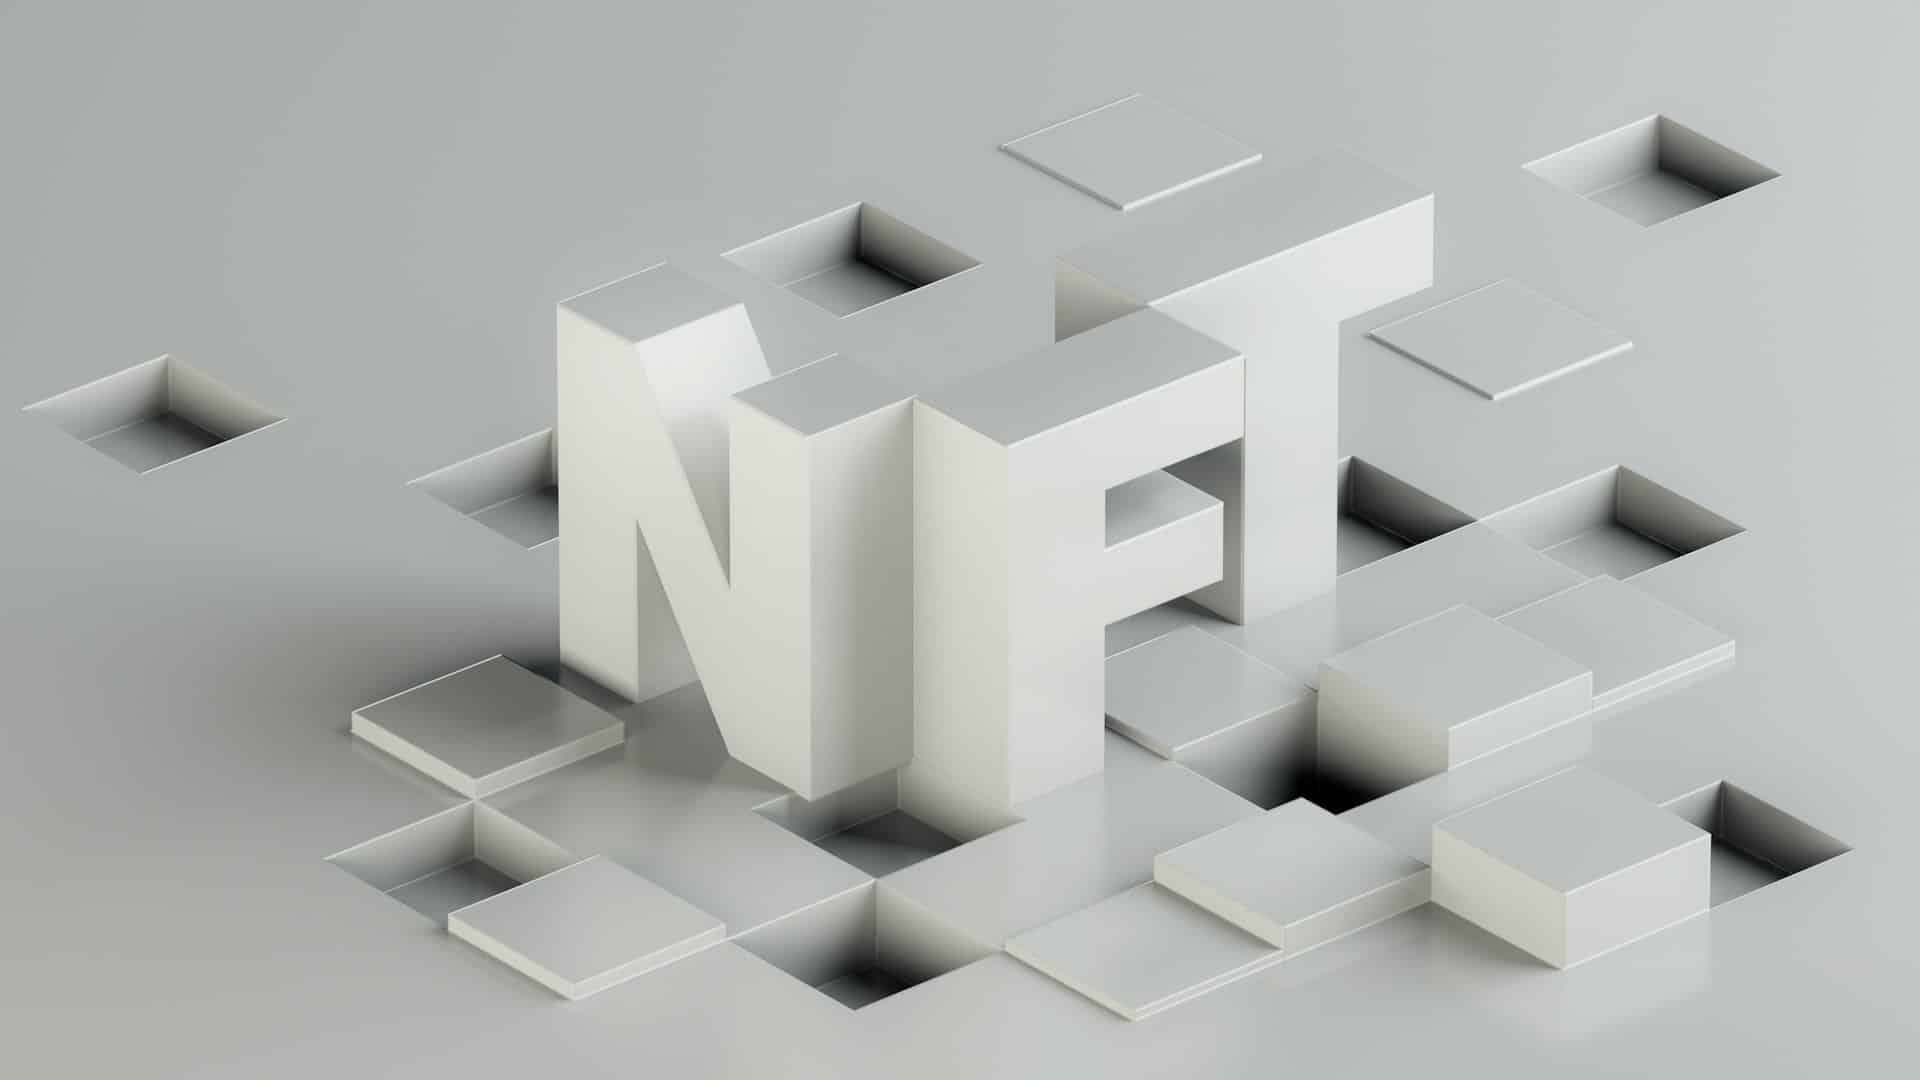 Troubled FTT investors turn to NFTs as means to recover funds. Decoding…